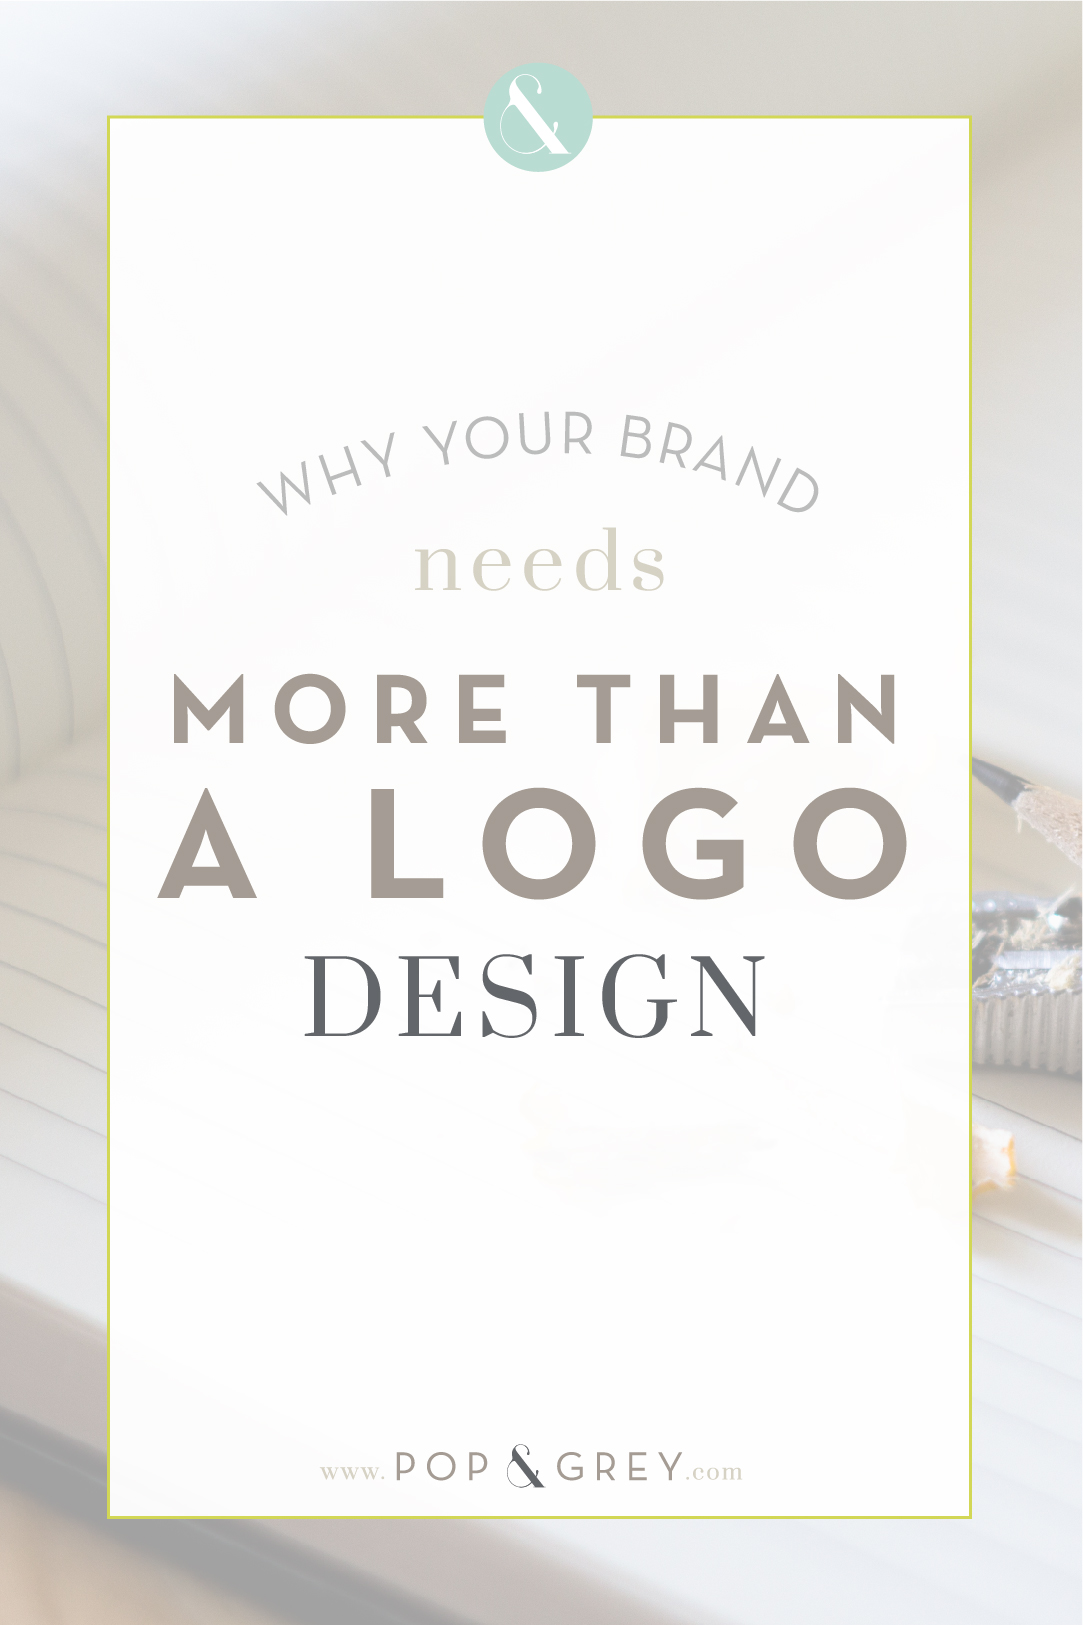 why your brand needs more than a logo design by Pop & Grey